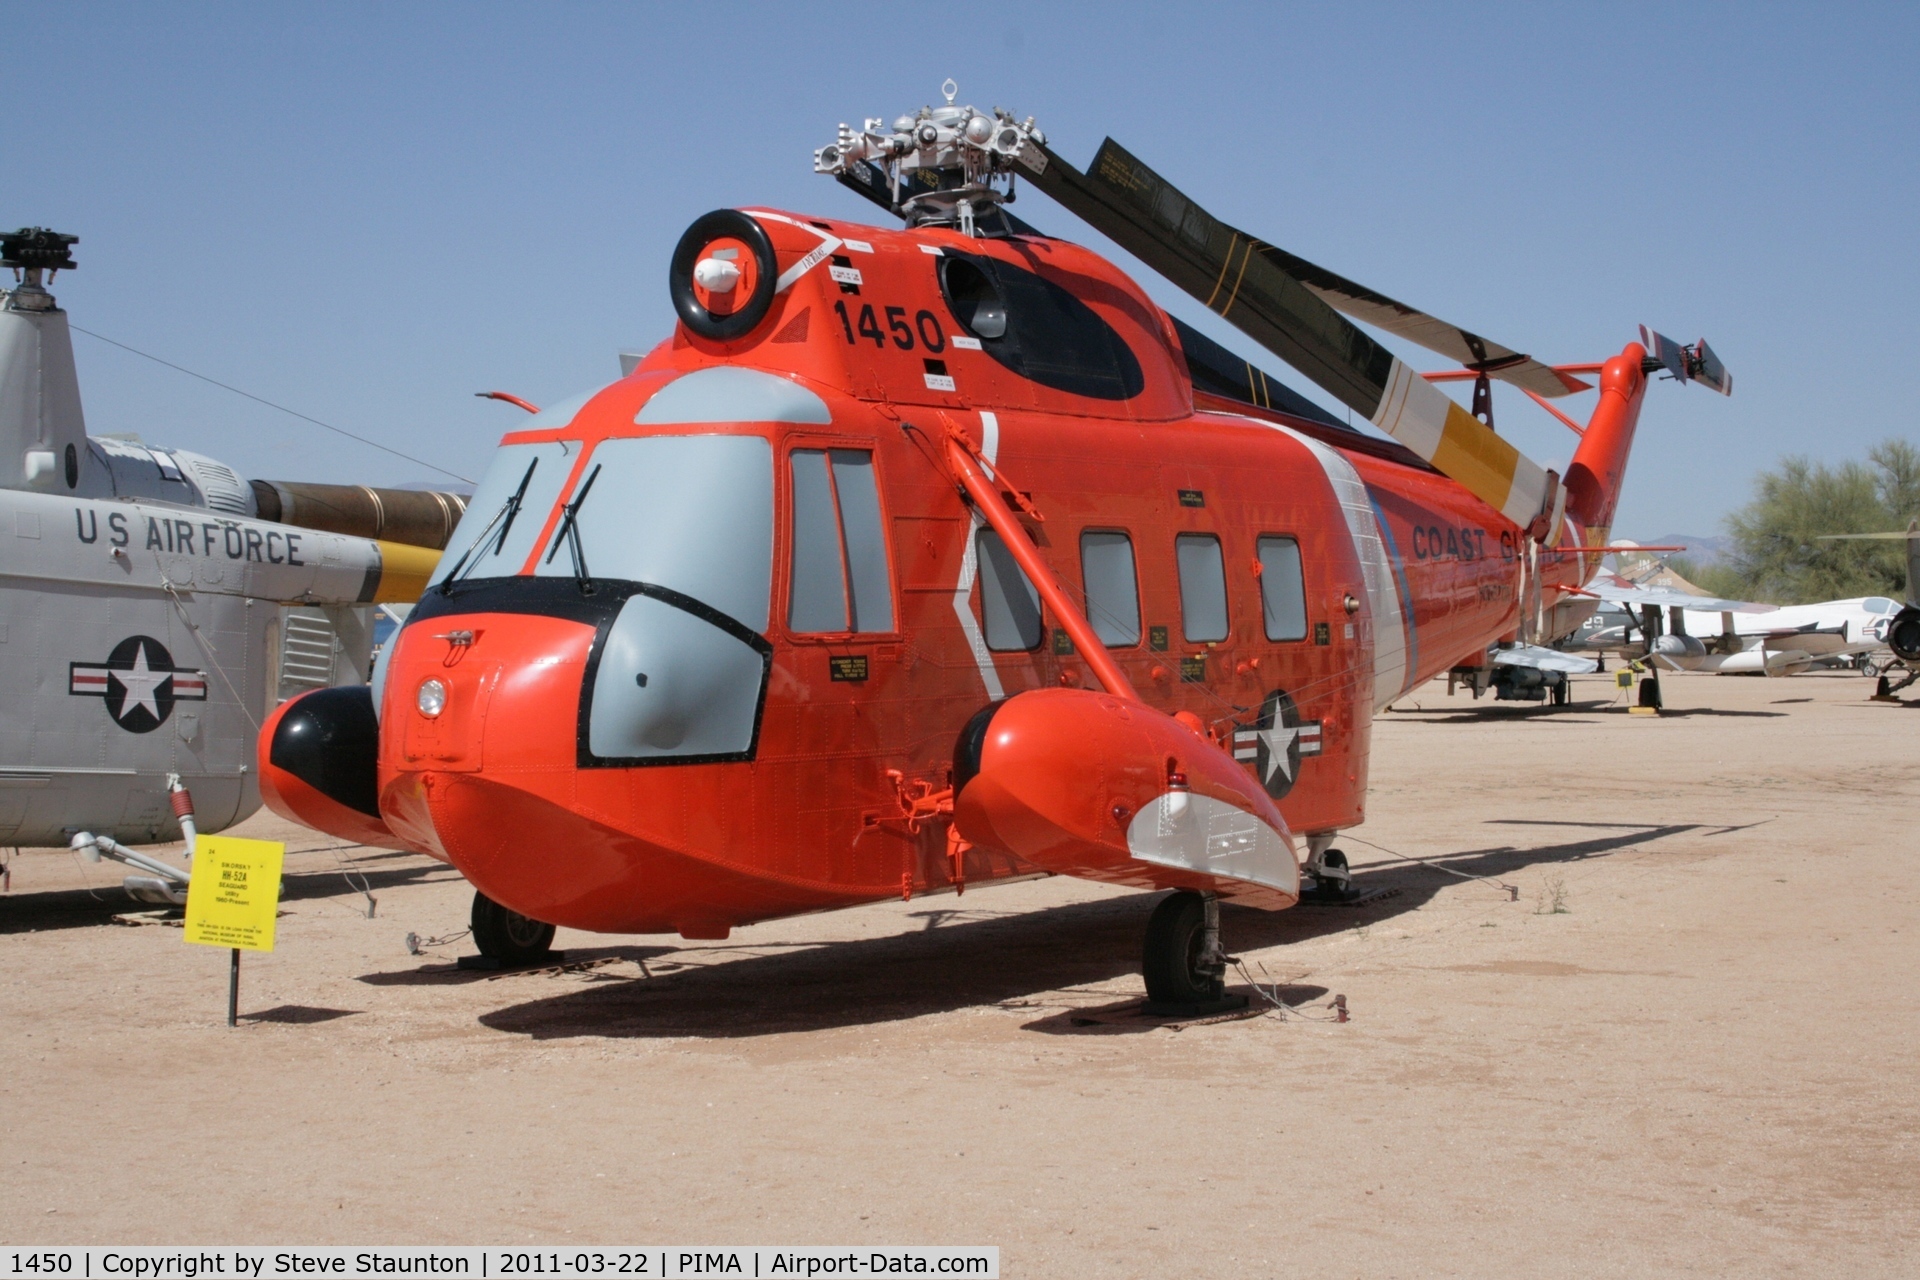 1450, Sikorsky HH-52A Sea Guard C/N 62.133, Taken at Pima Air and Space Museum, in March 2011 whilst on an Aeroprint Aviation tour